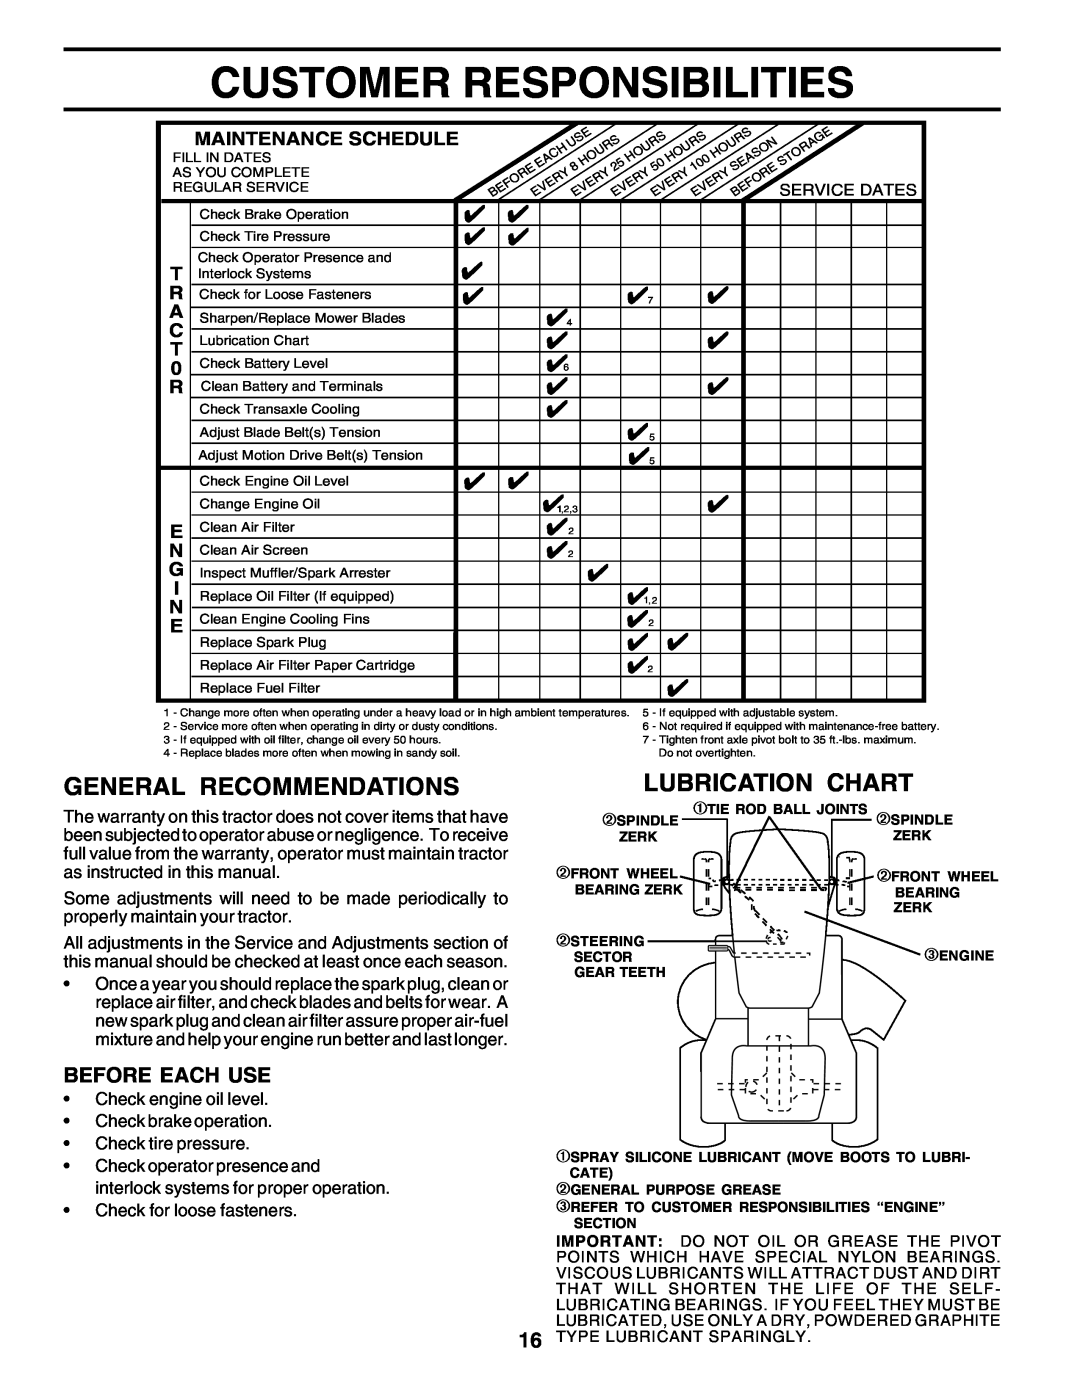 Poulan PRGT22H50B owner manual Customer Responsibilities, General Recommendations, Lubrication Chart ¡, Before Each Use 